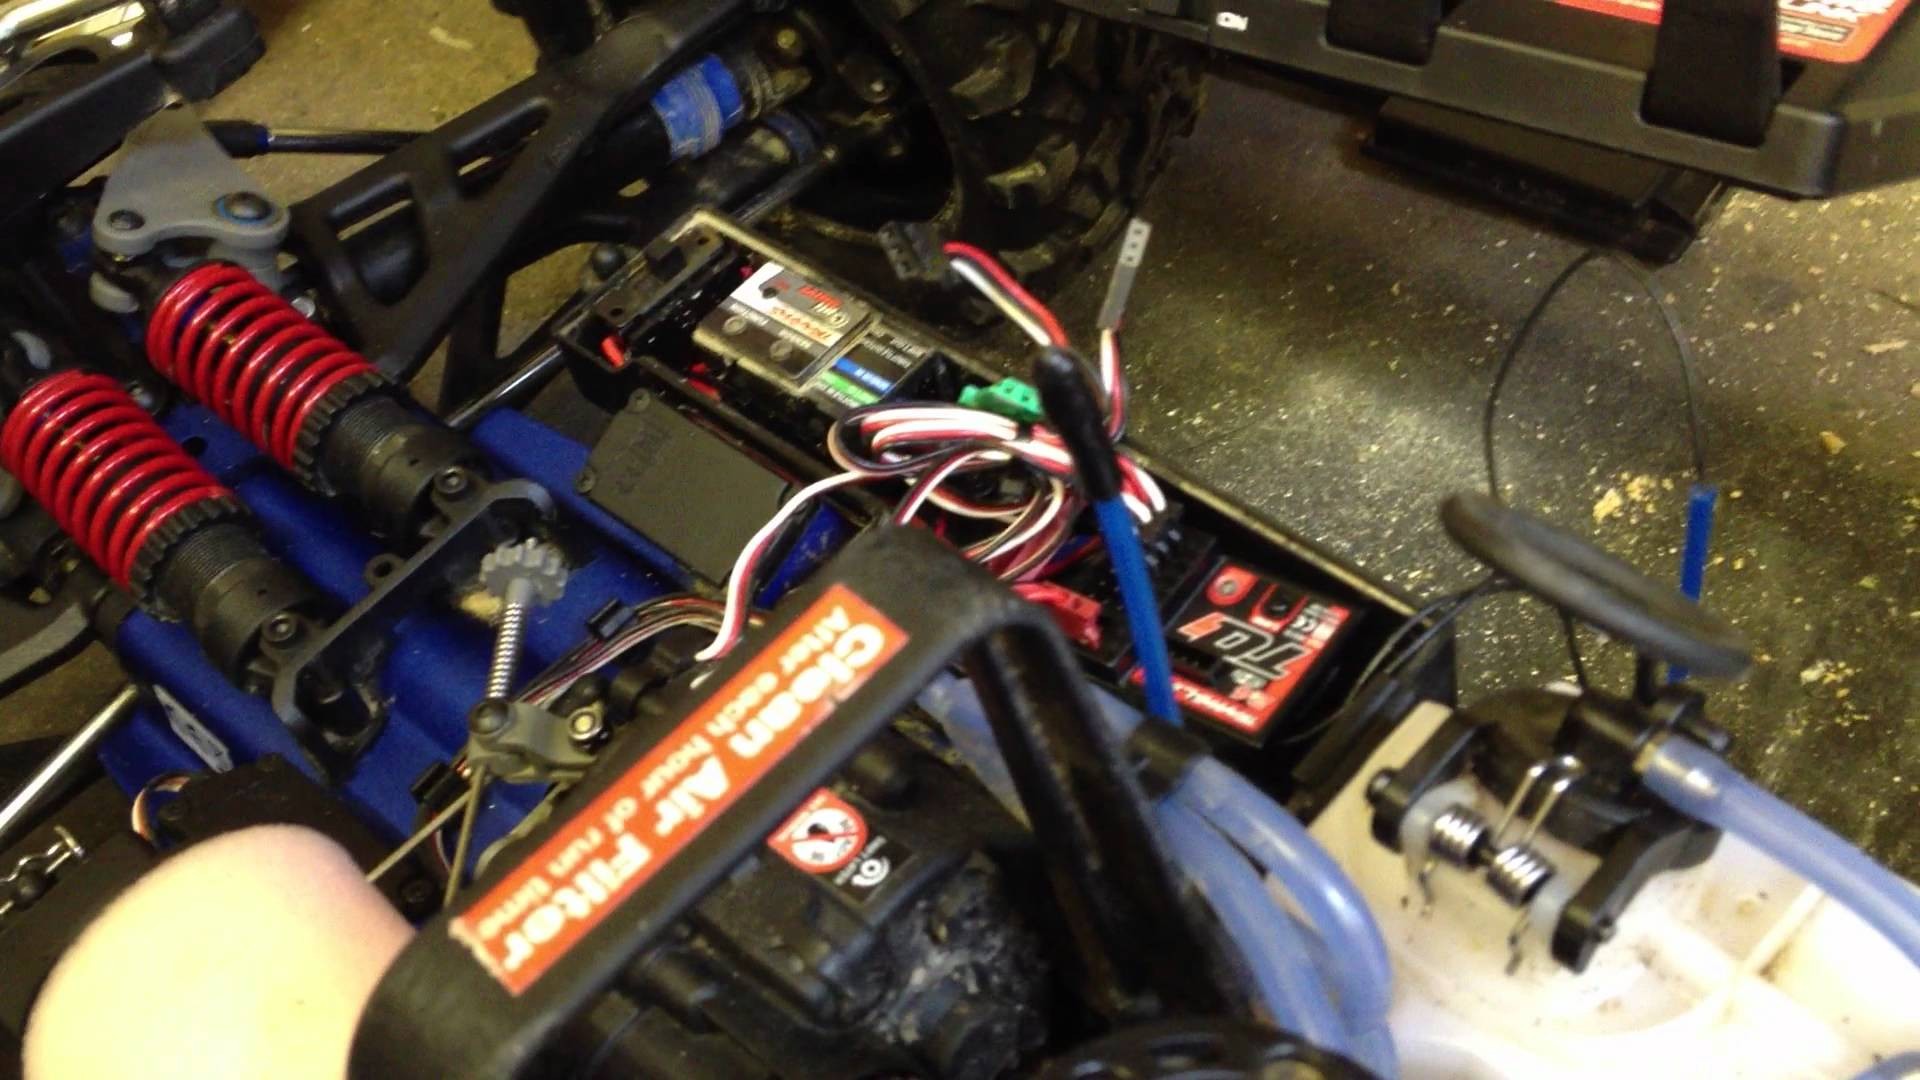 Traxxas Tqi Receiver Wiring Diagram from mainetreasurechest.com